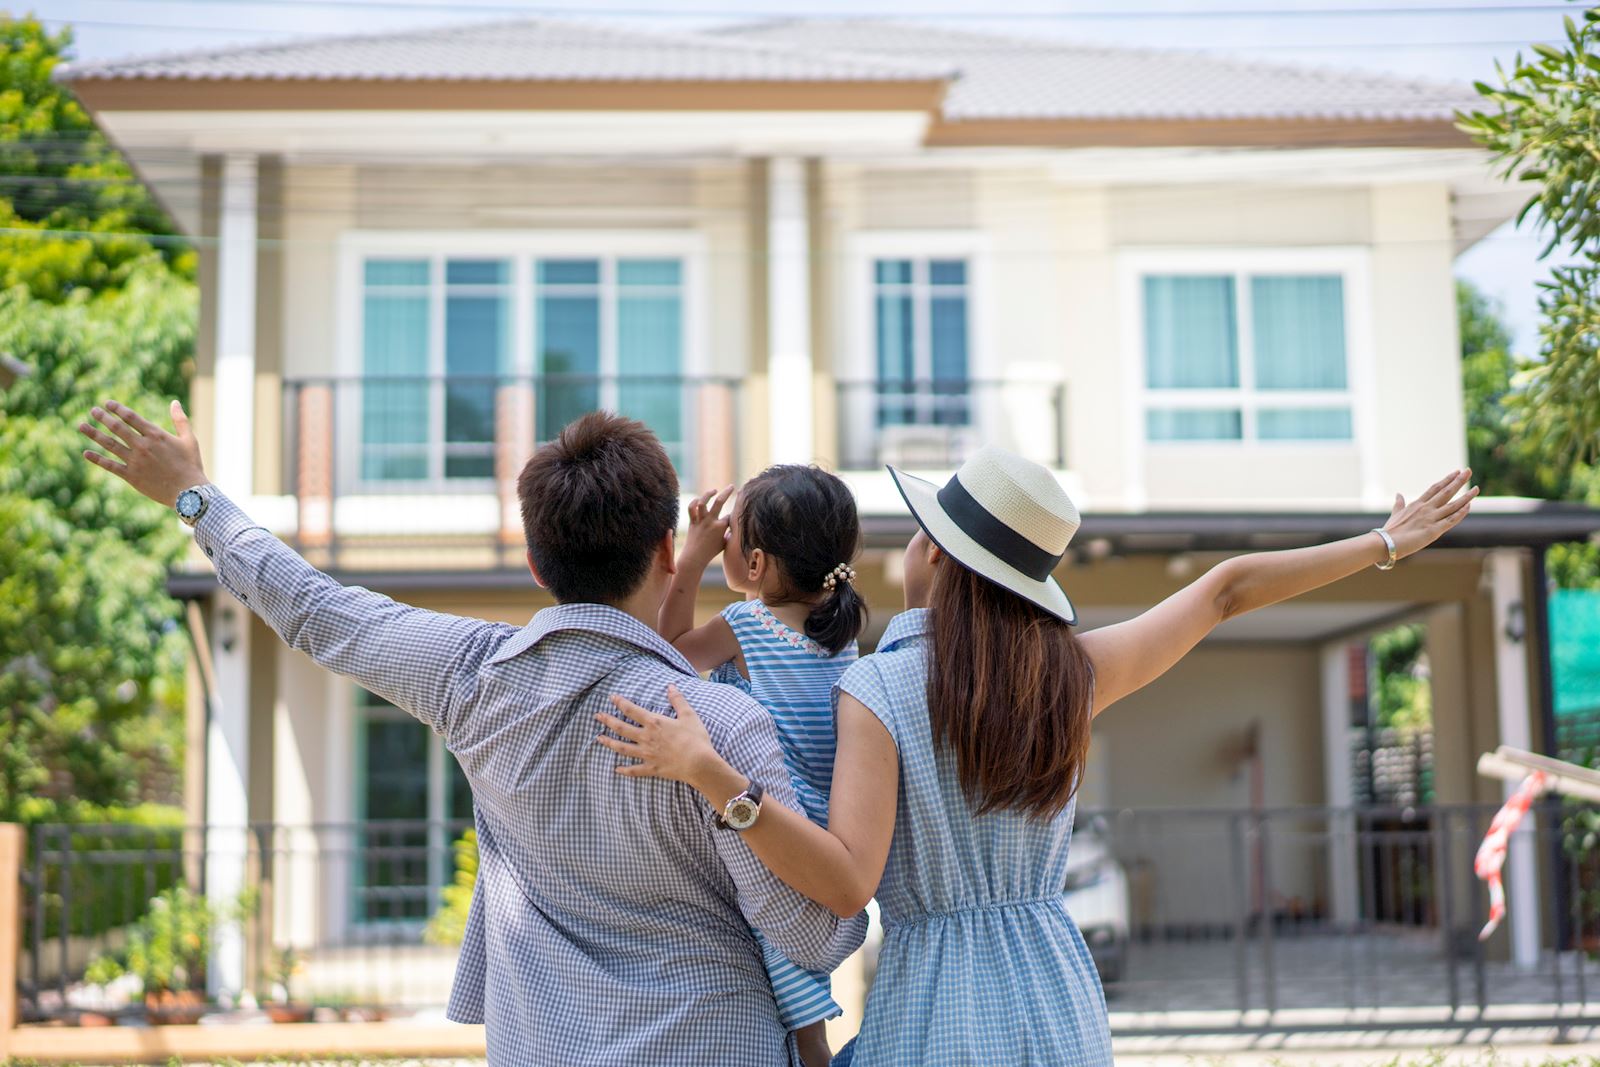 Purchasing a home can be a daunting experience, especially for first-time buyers. To help you with the process, check out our latest blog for tips on how to get your dream house